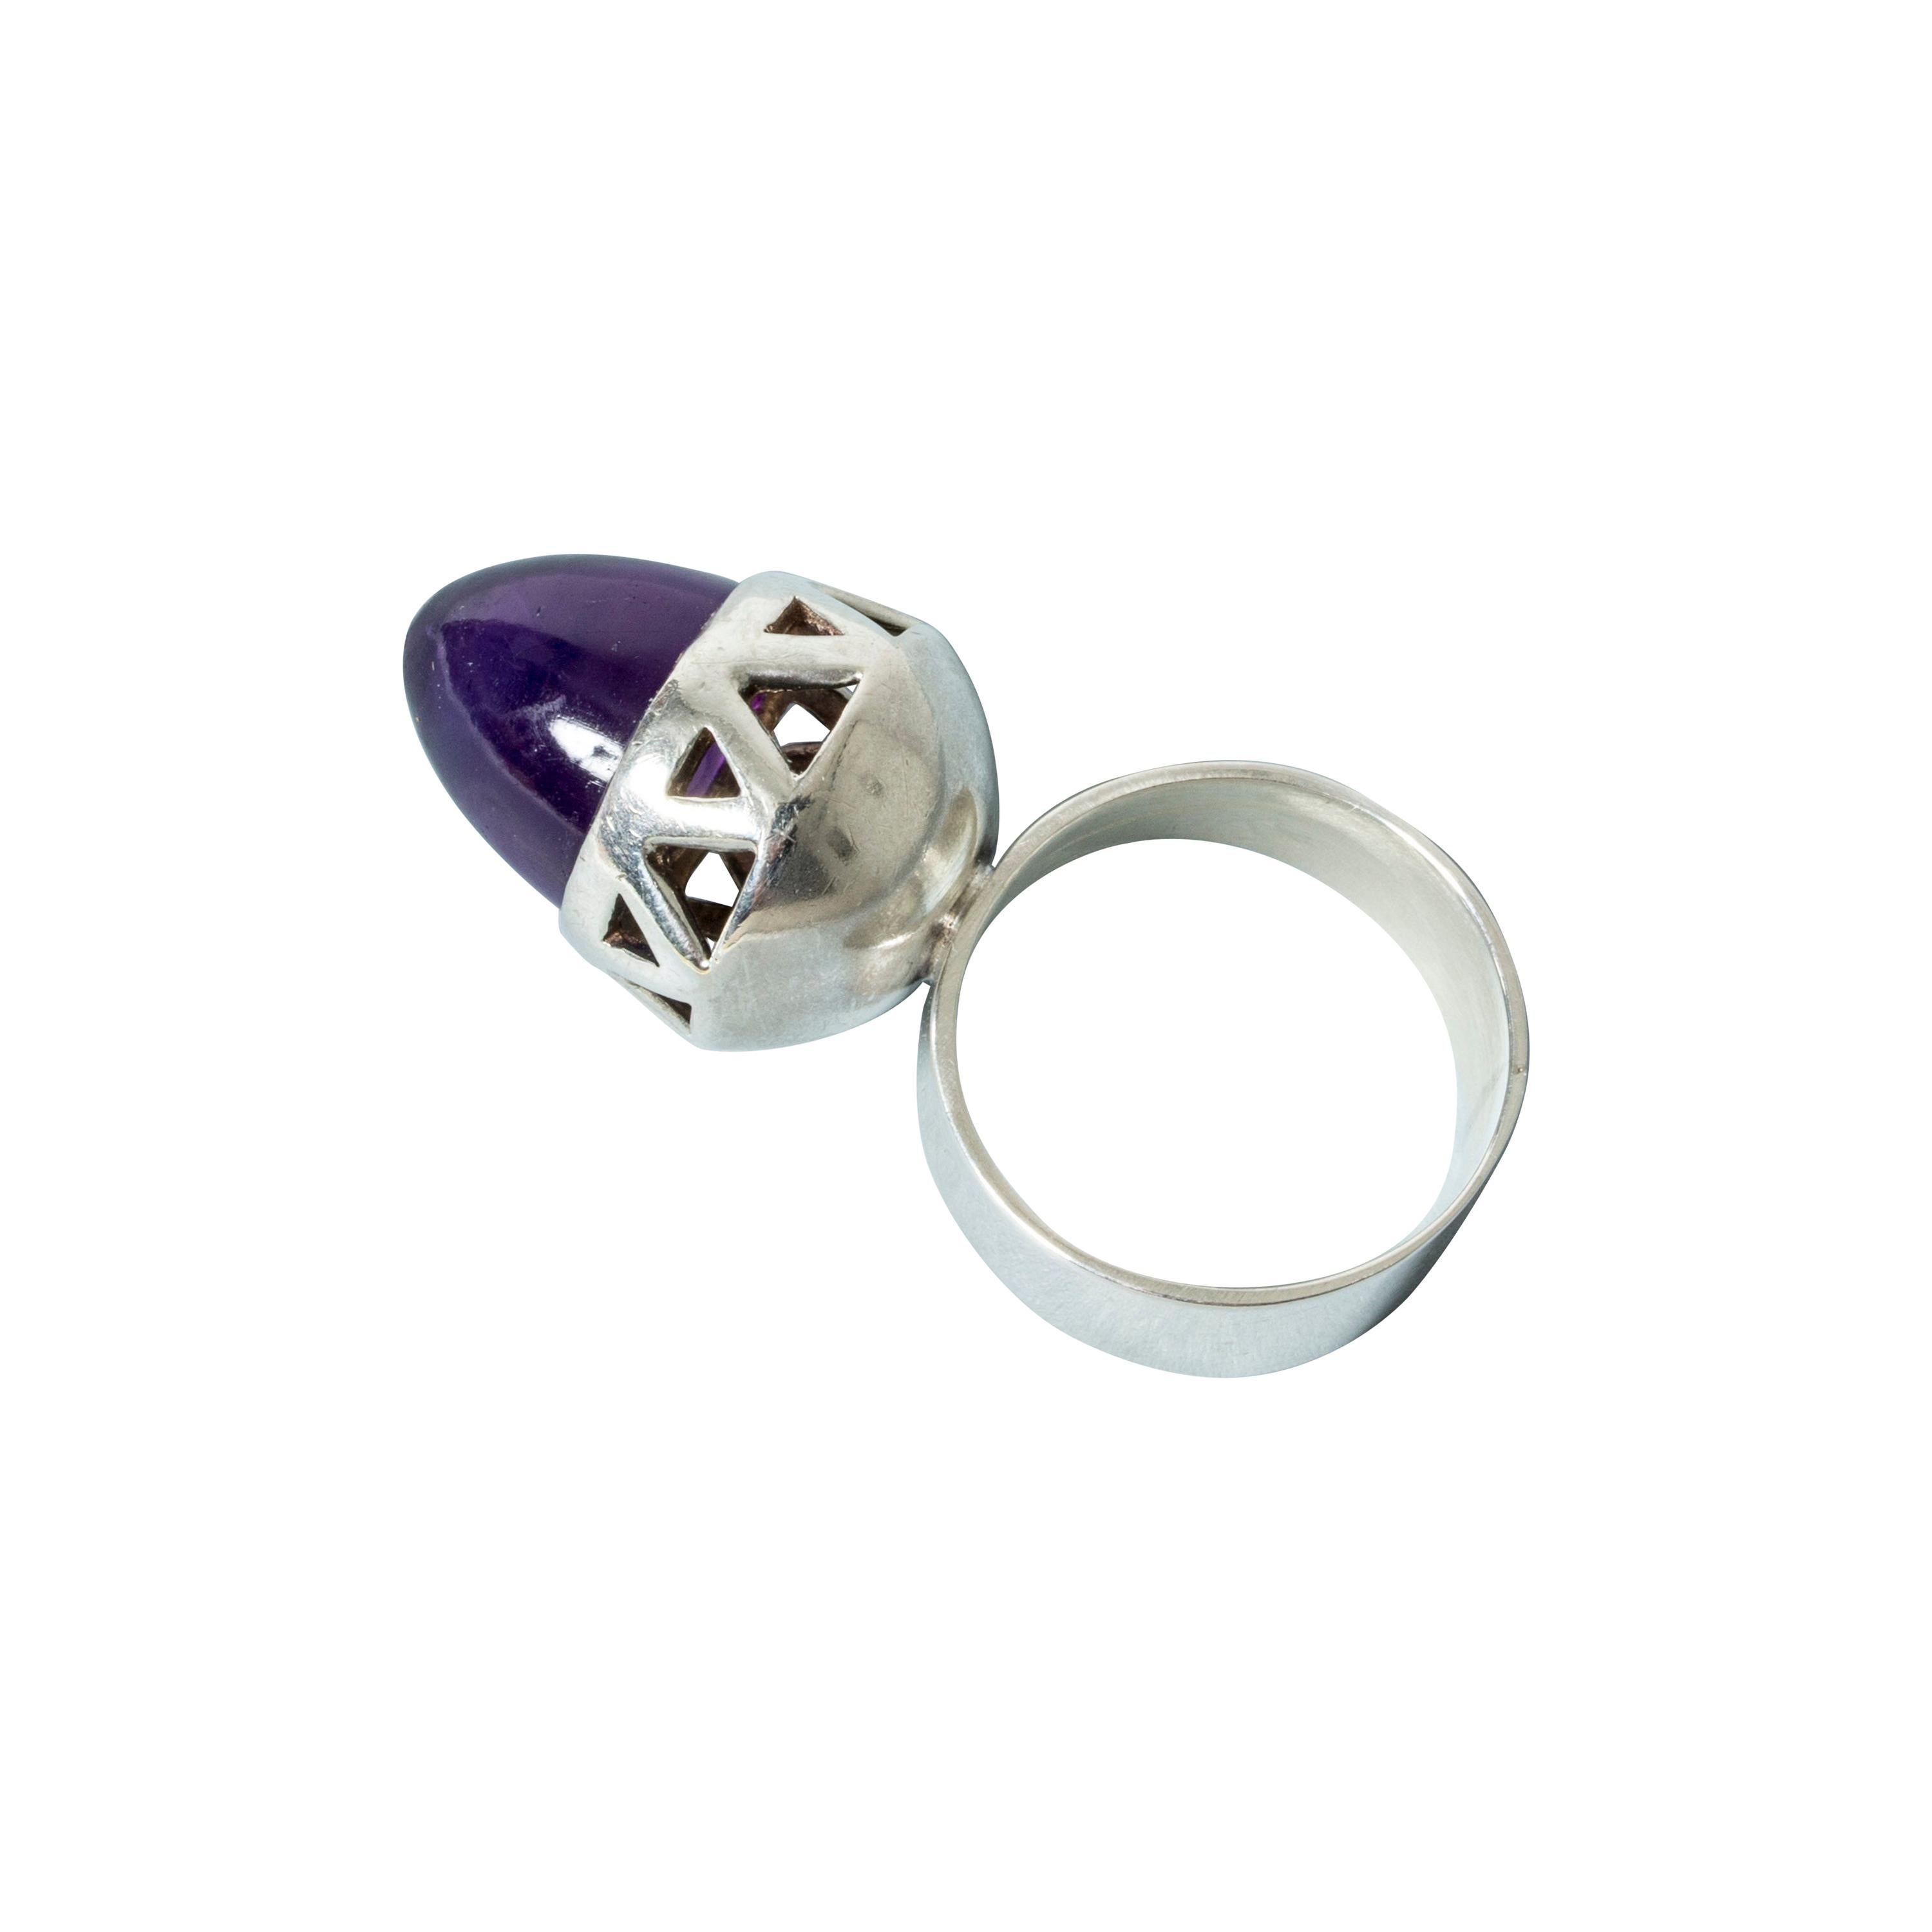 Silver and Amethyst Ring from Bengt Hallberg, Sweden, 1968